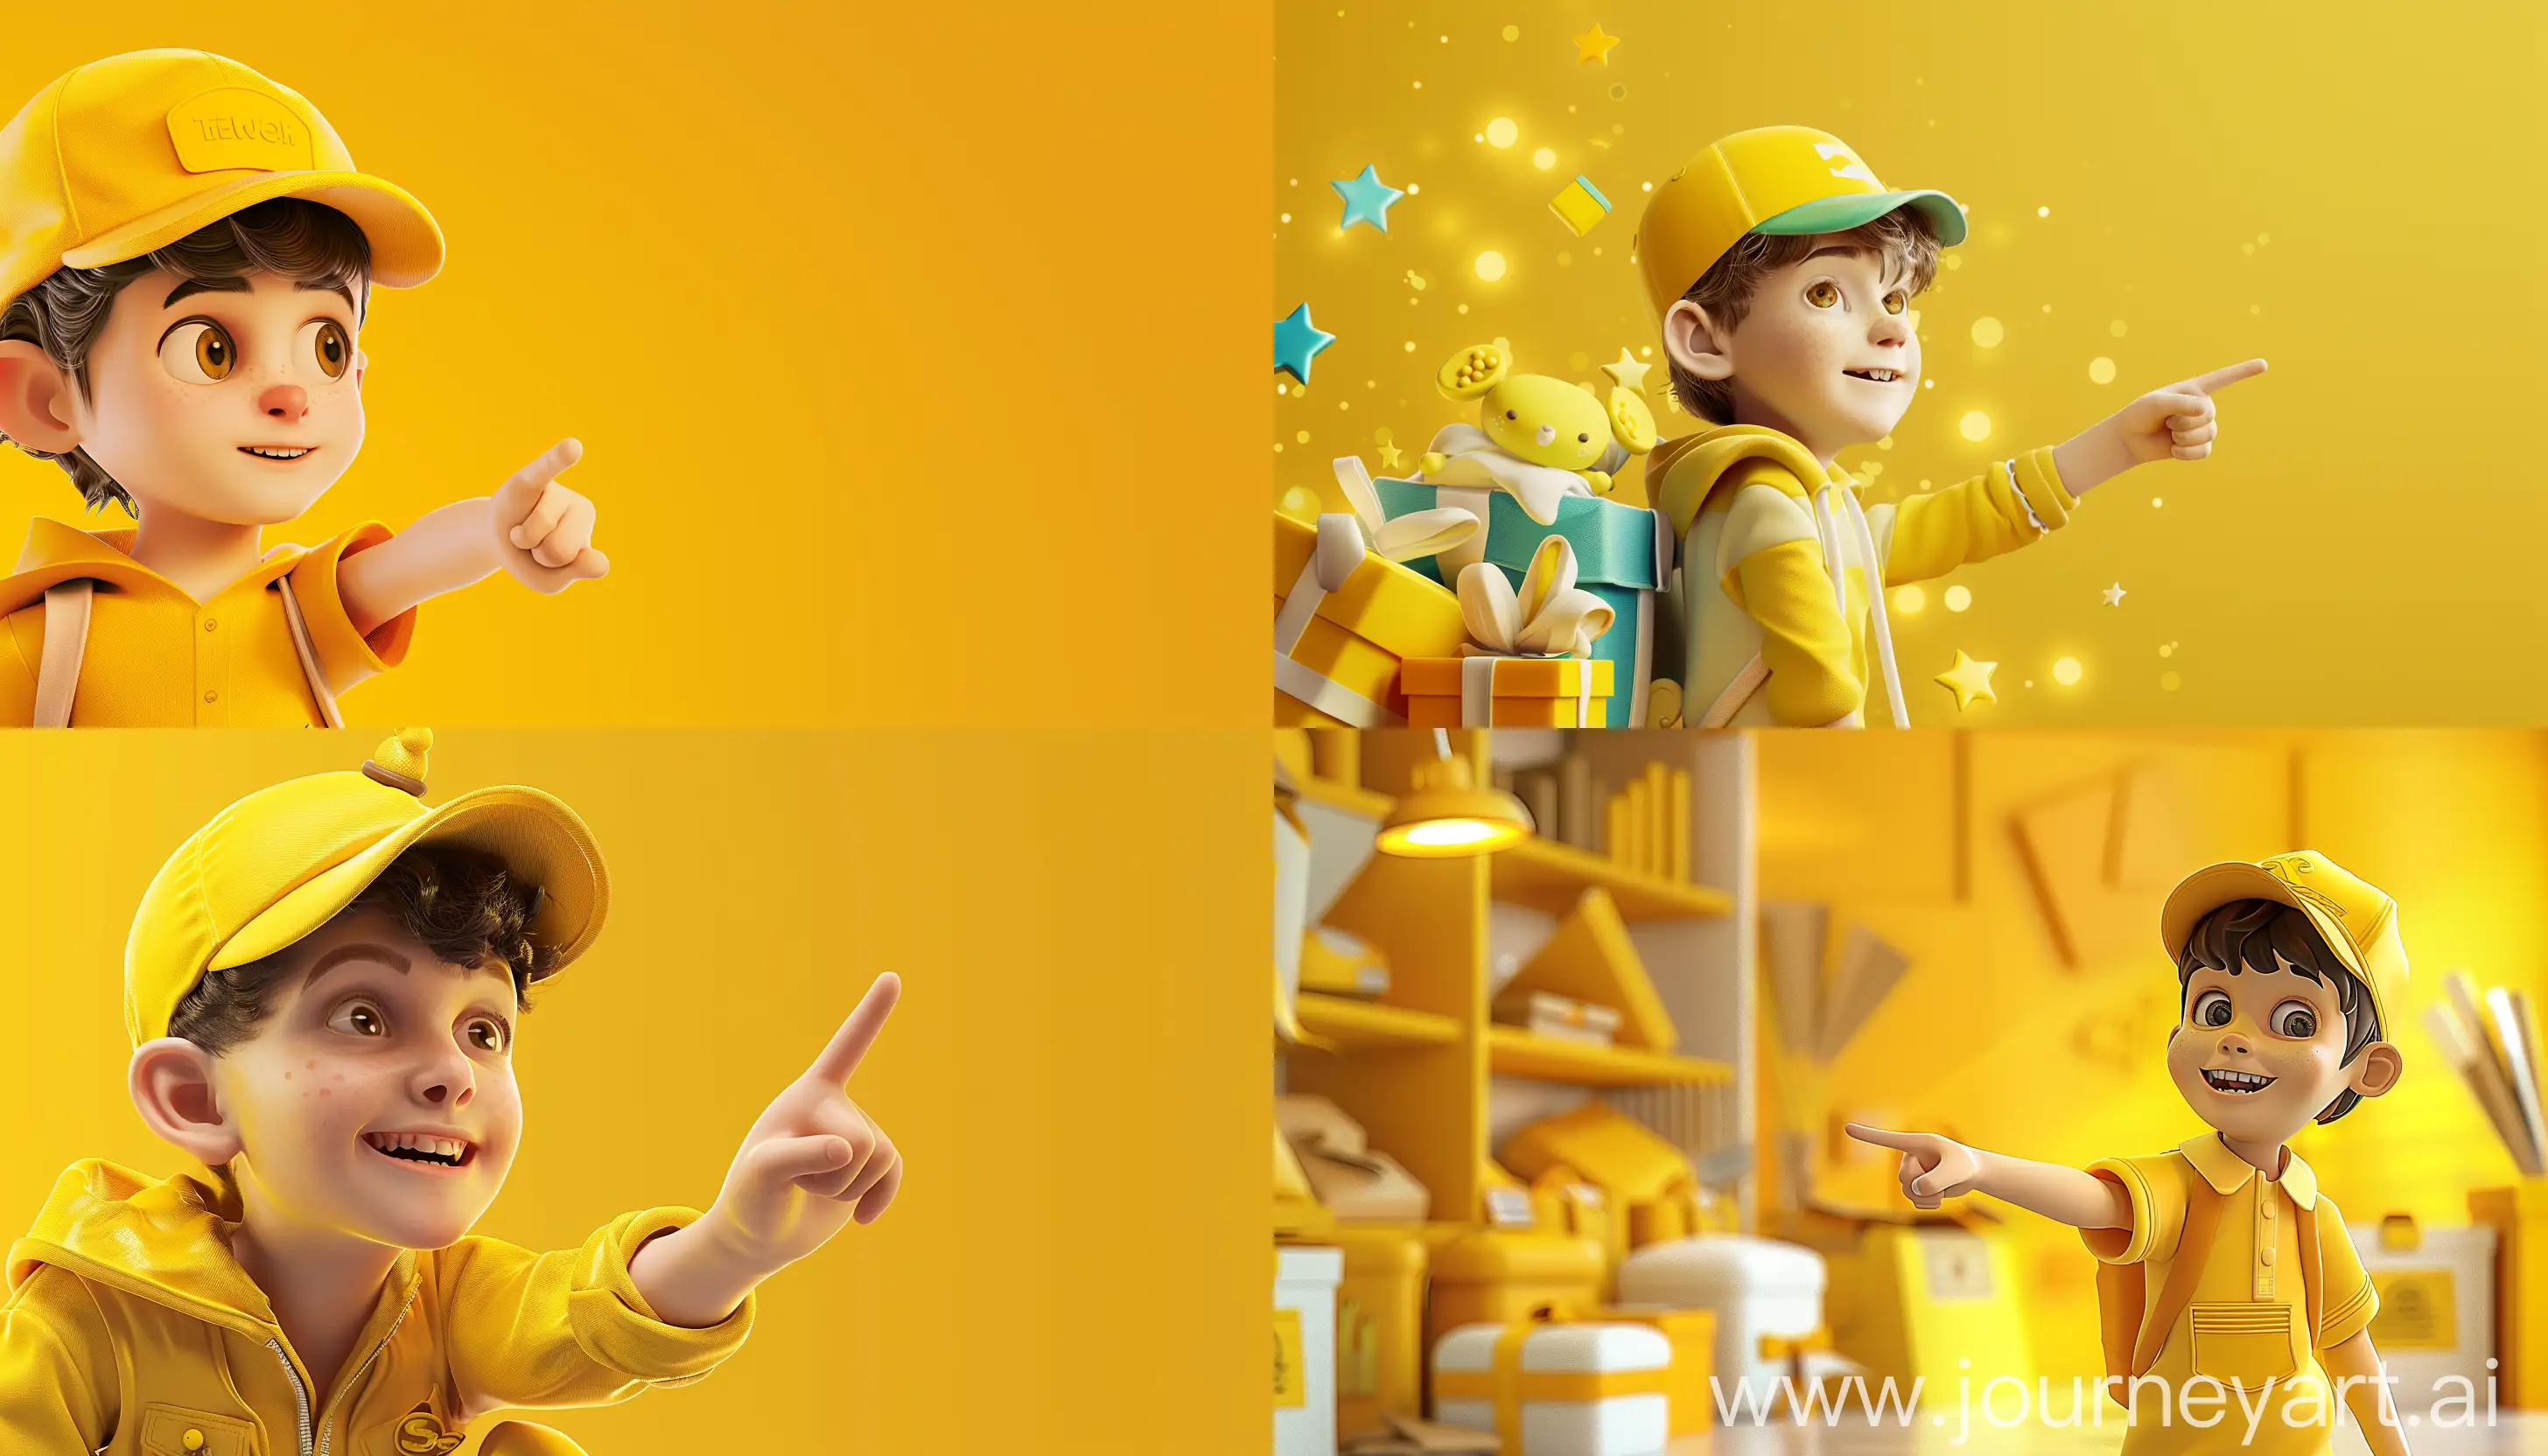 Dynamic-Marketing-Banner-Boy-Promoting-Special-Offers-in-Vibrant-Yellow-Setting